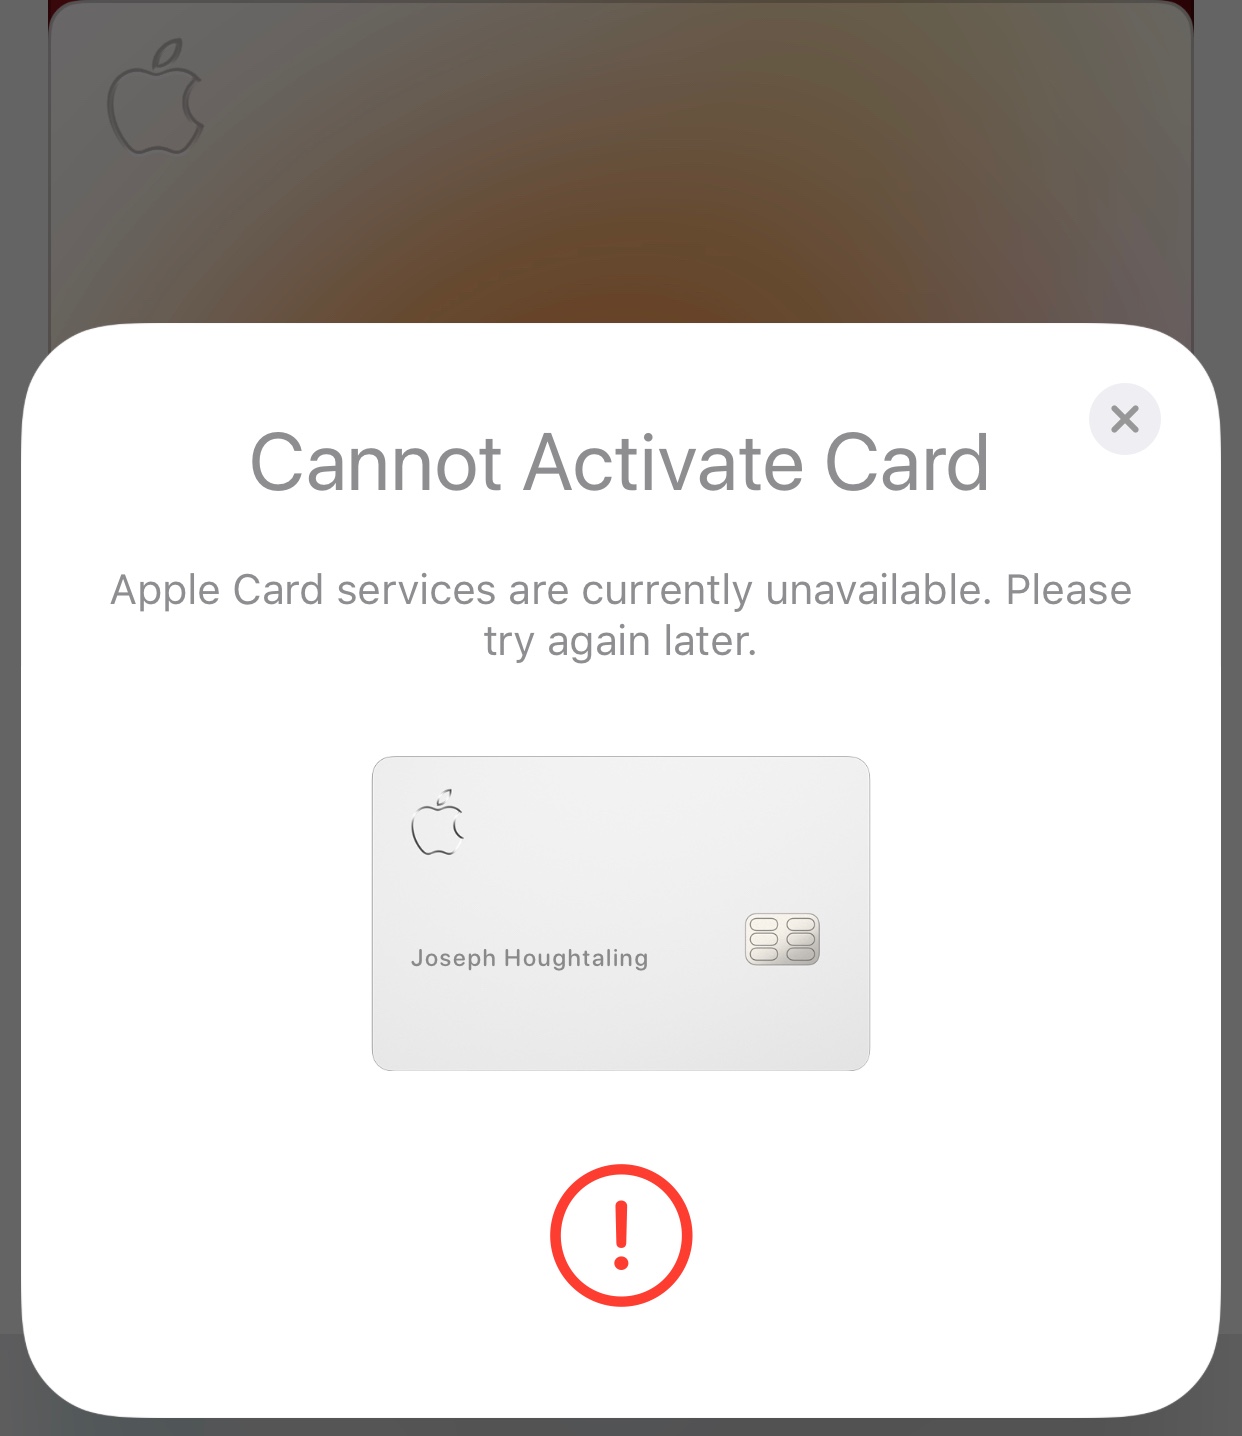 Apple Titanium Card: How to get it, activate it, use it, and more